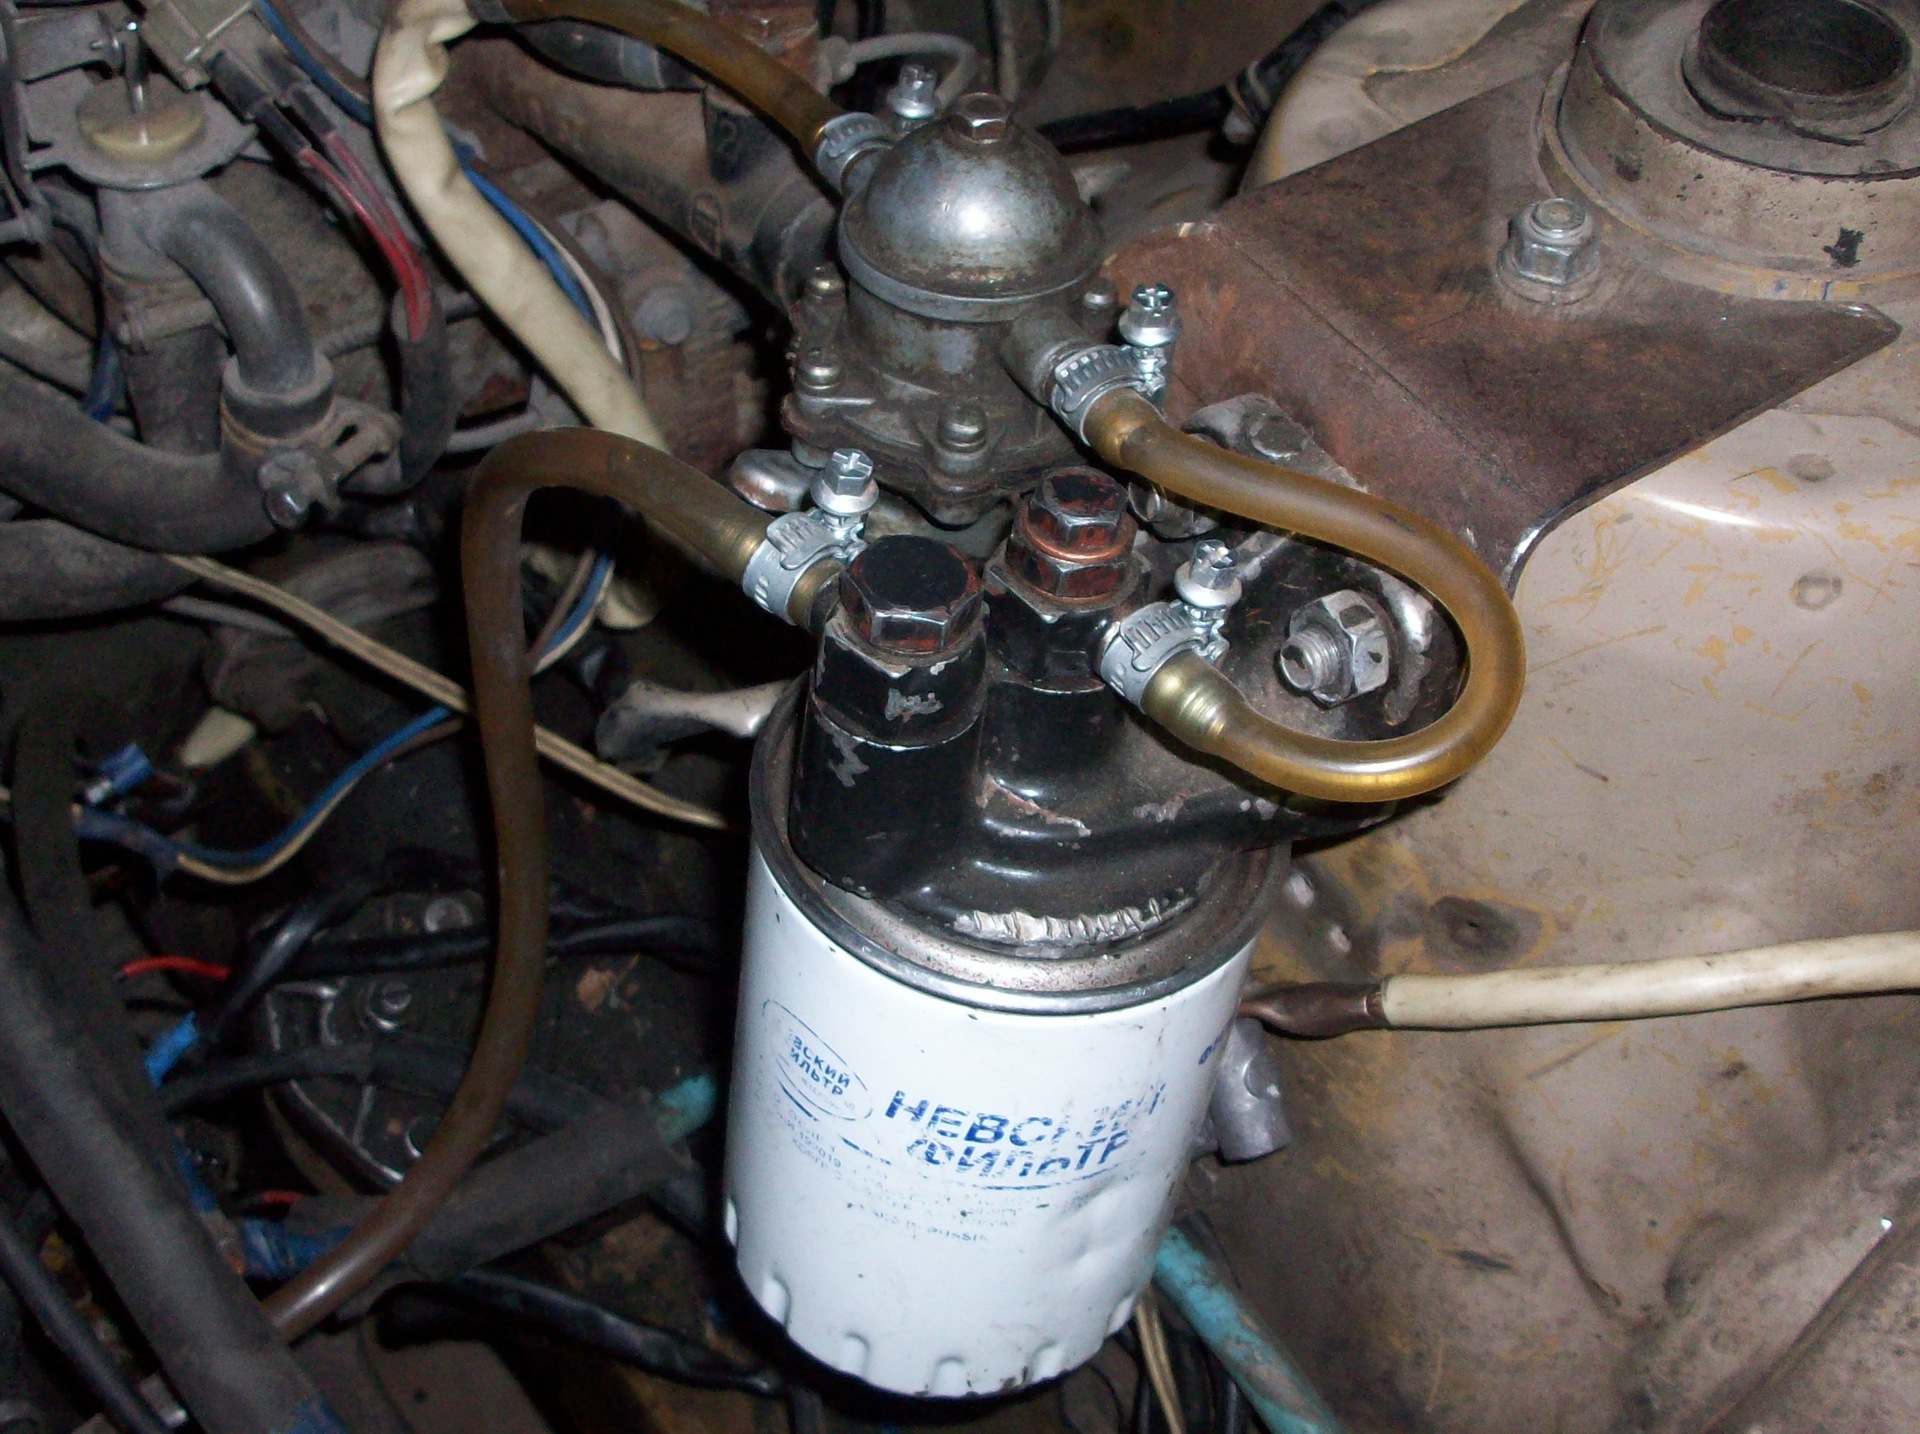 installing fuel filter and pumping - Toyota Cressida 1979